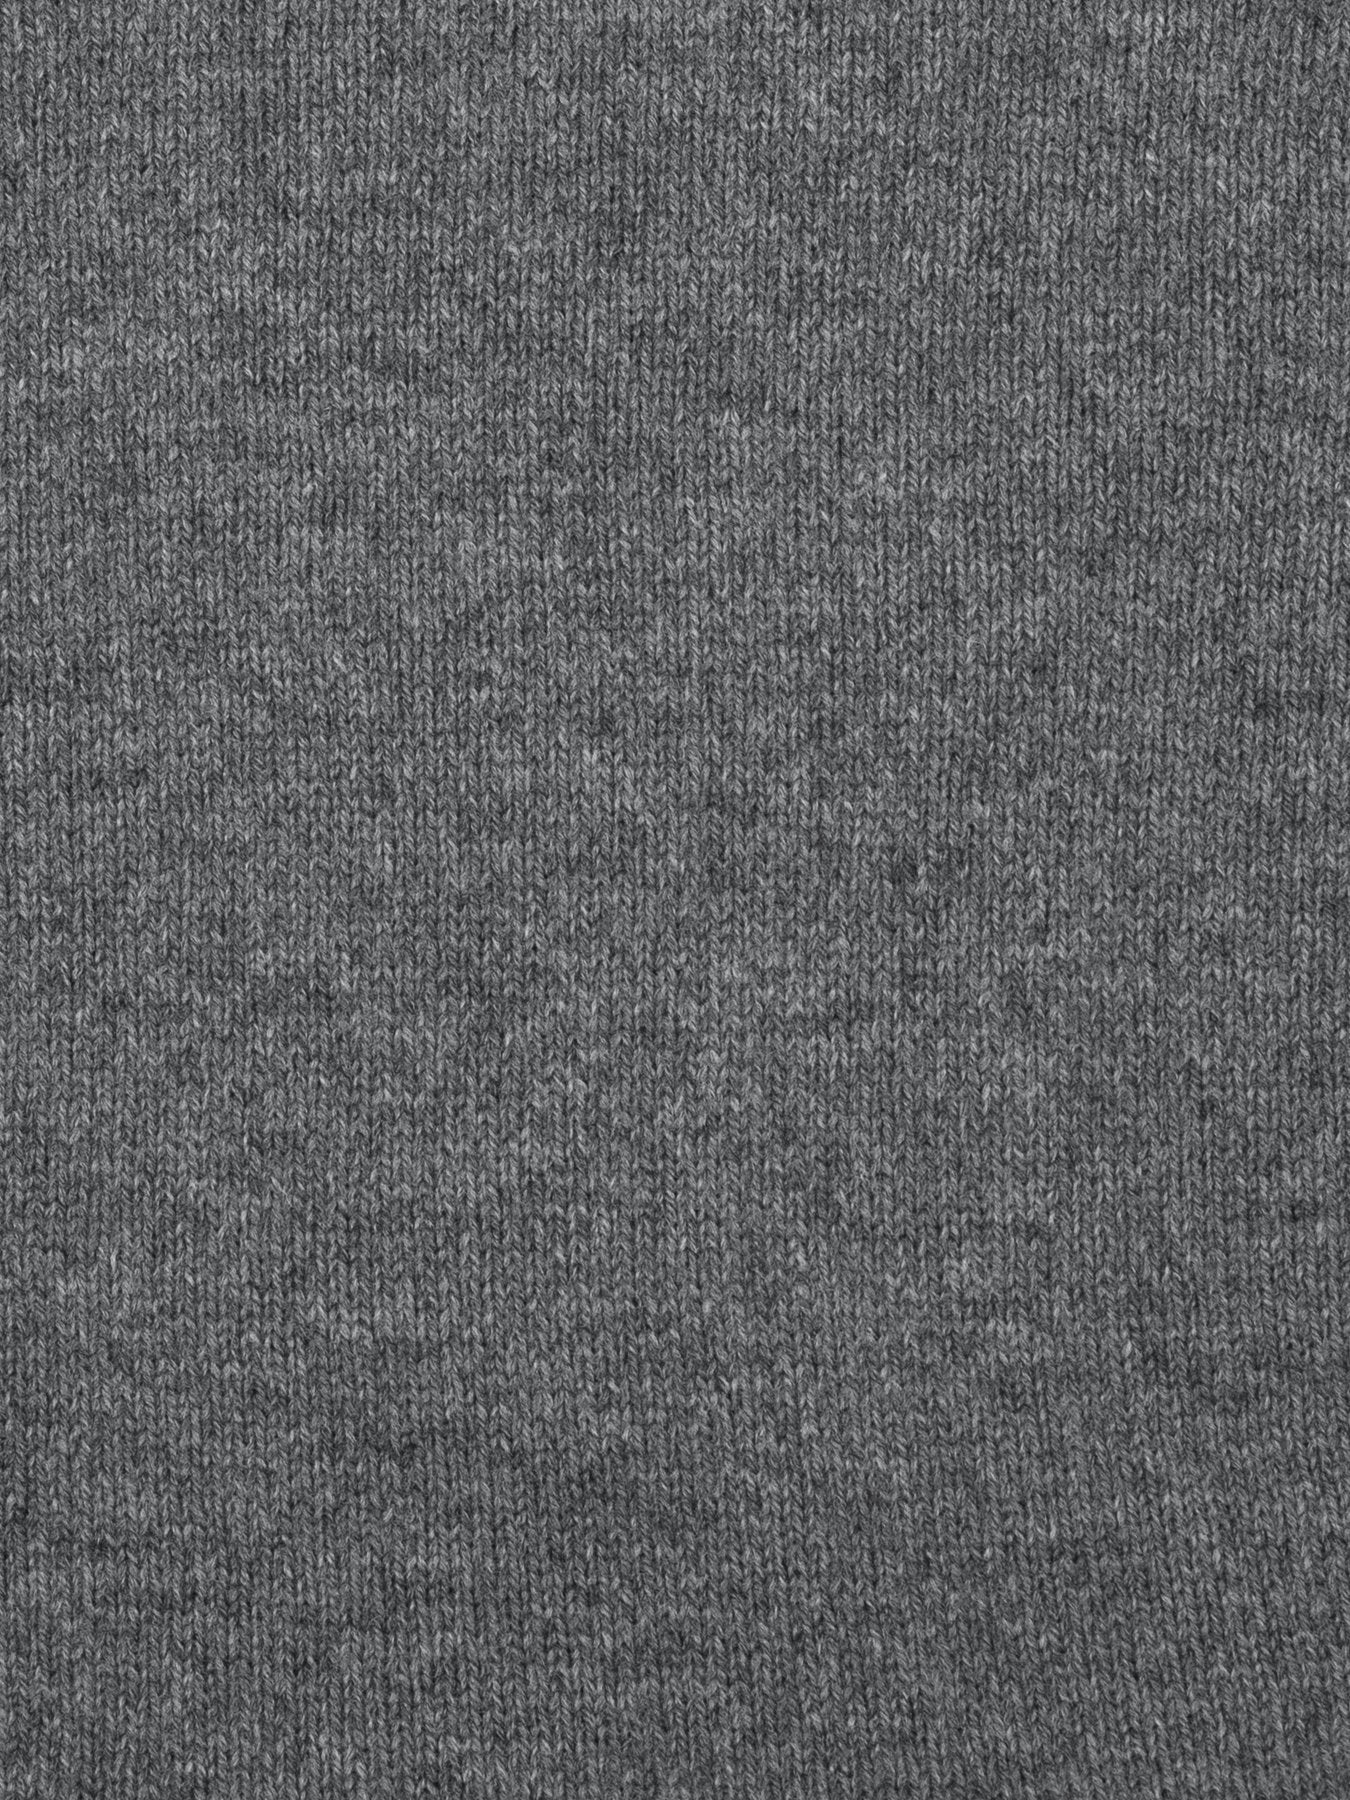 a swatch of plain single jersey knitting made from fine merino wool in a dark grey colour